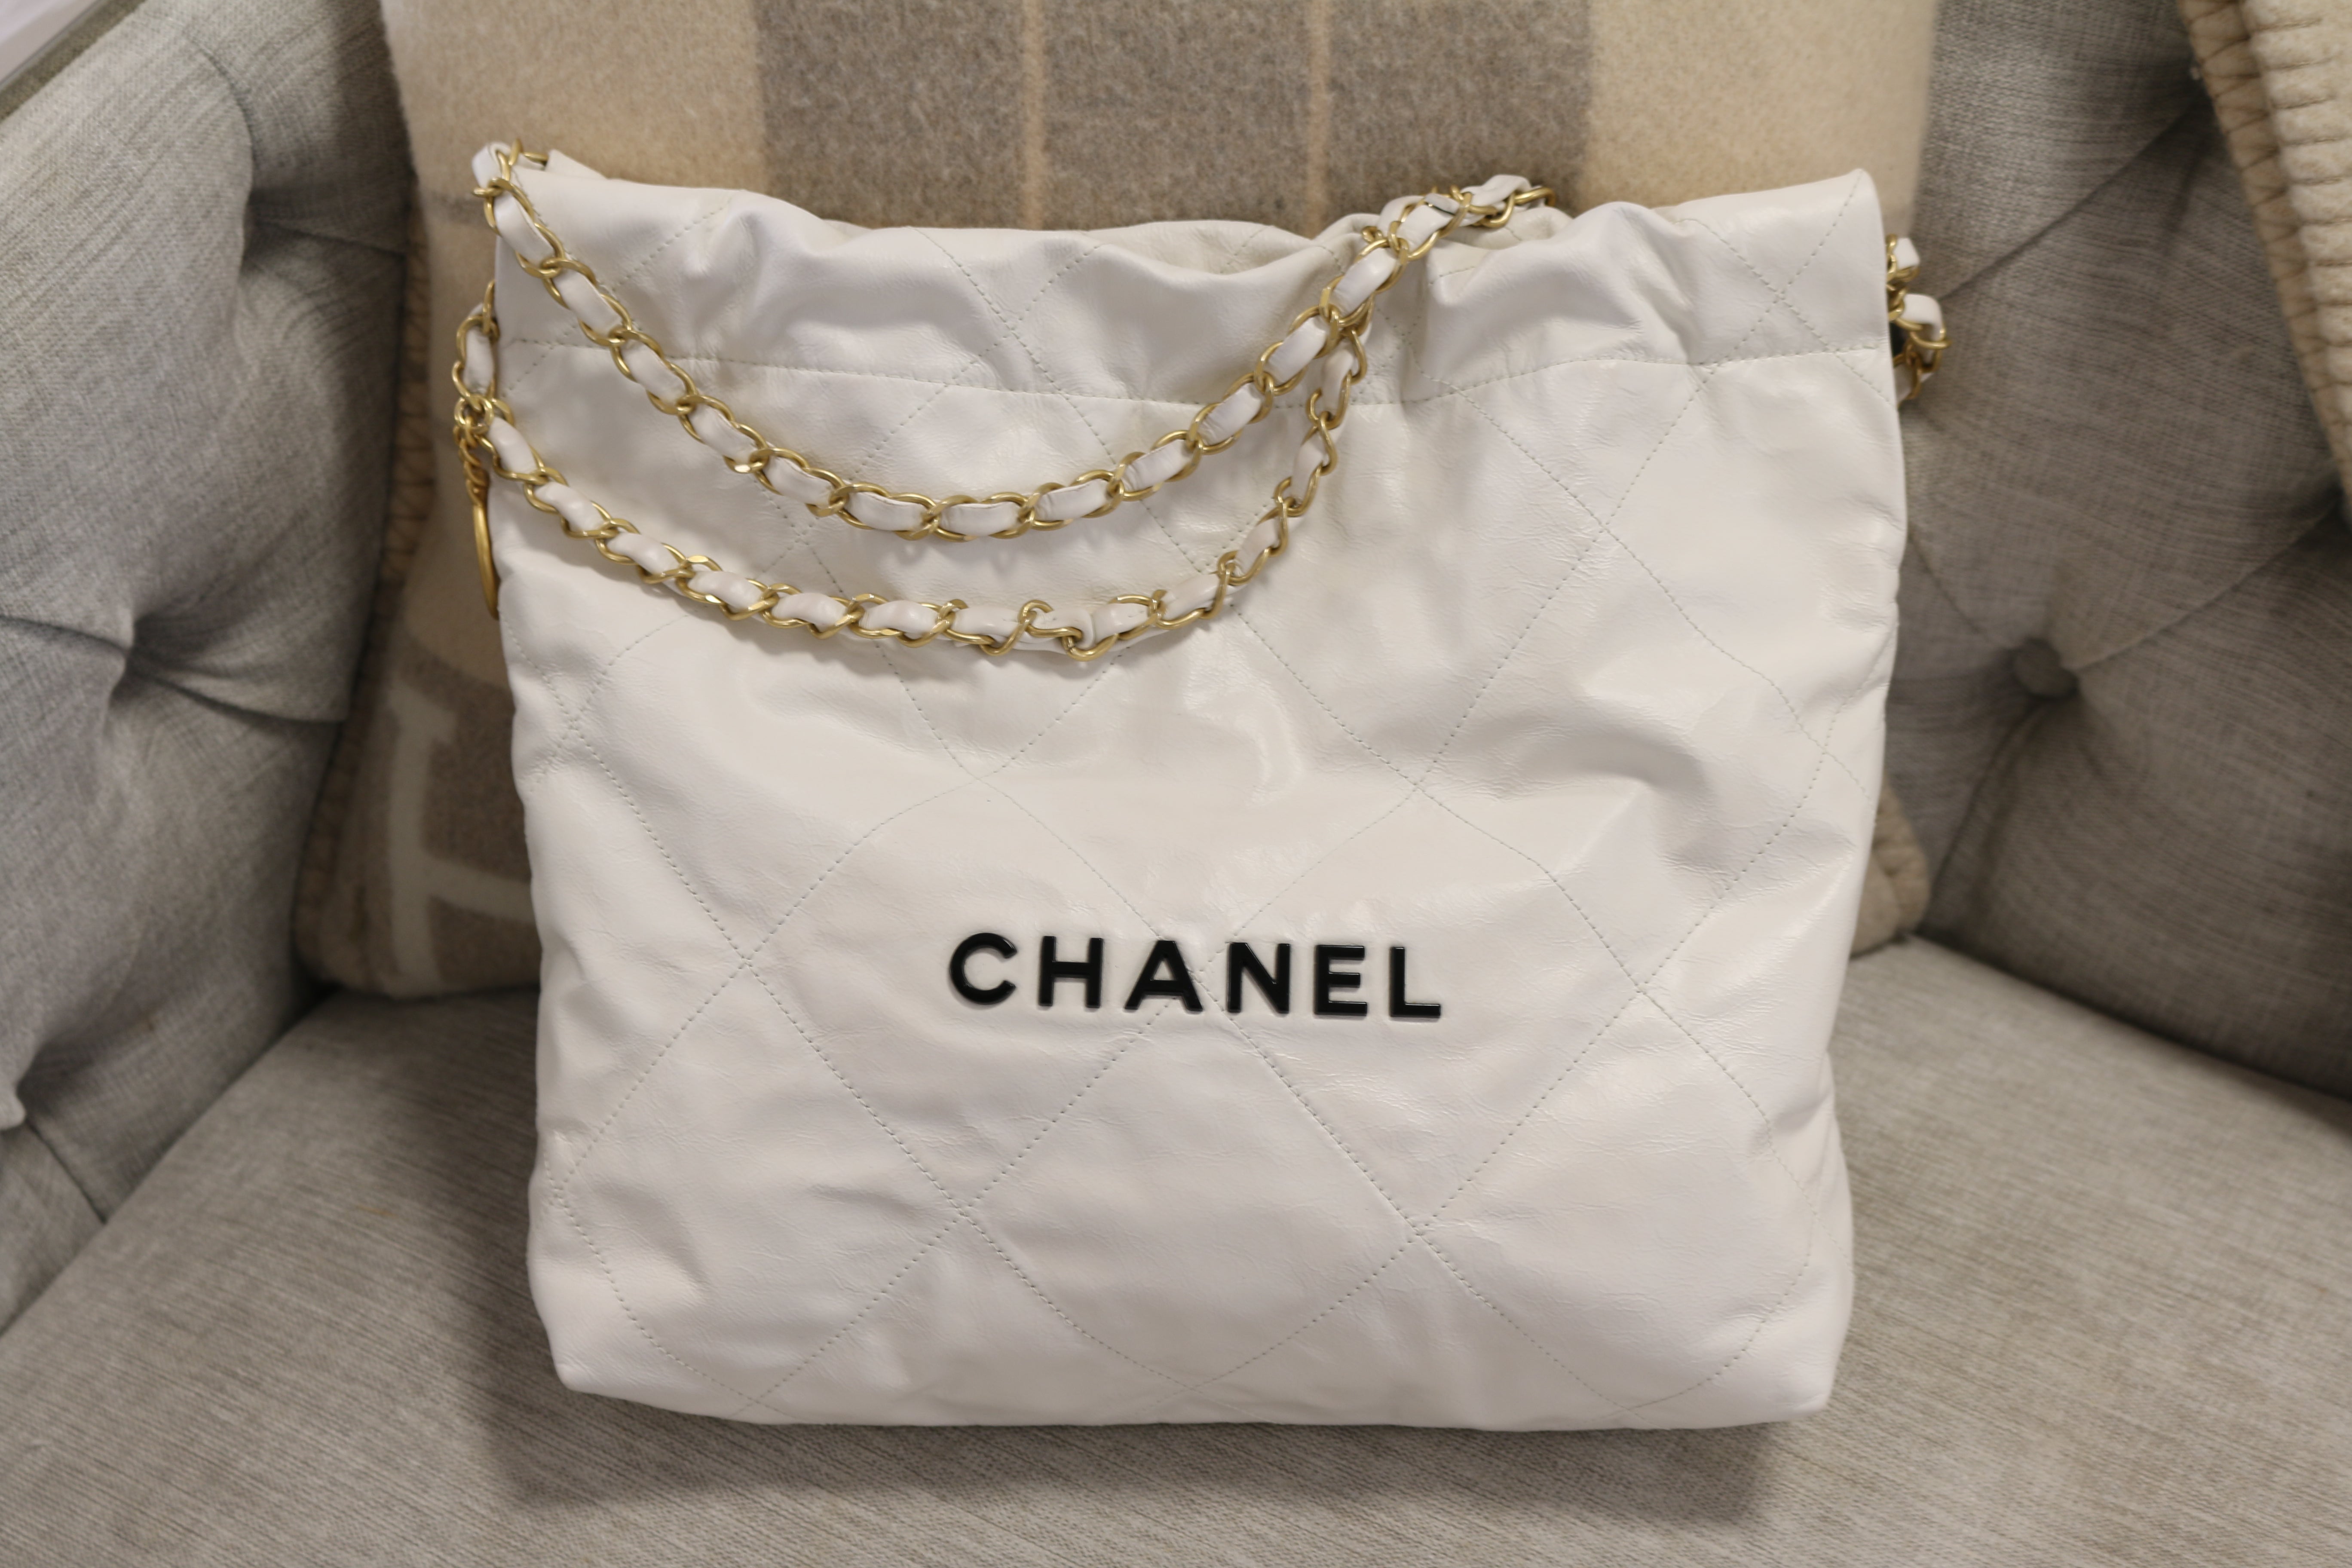 Do Chanel VIP gifts have serial numbers? - Questions & Answers